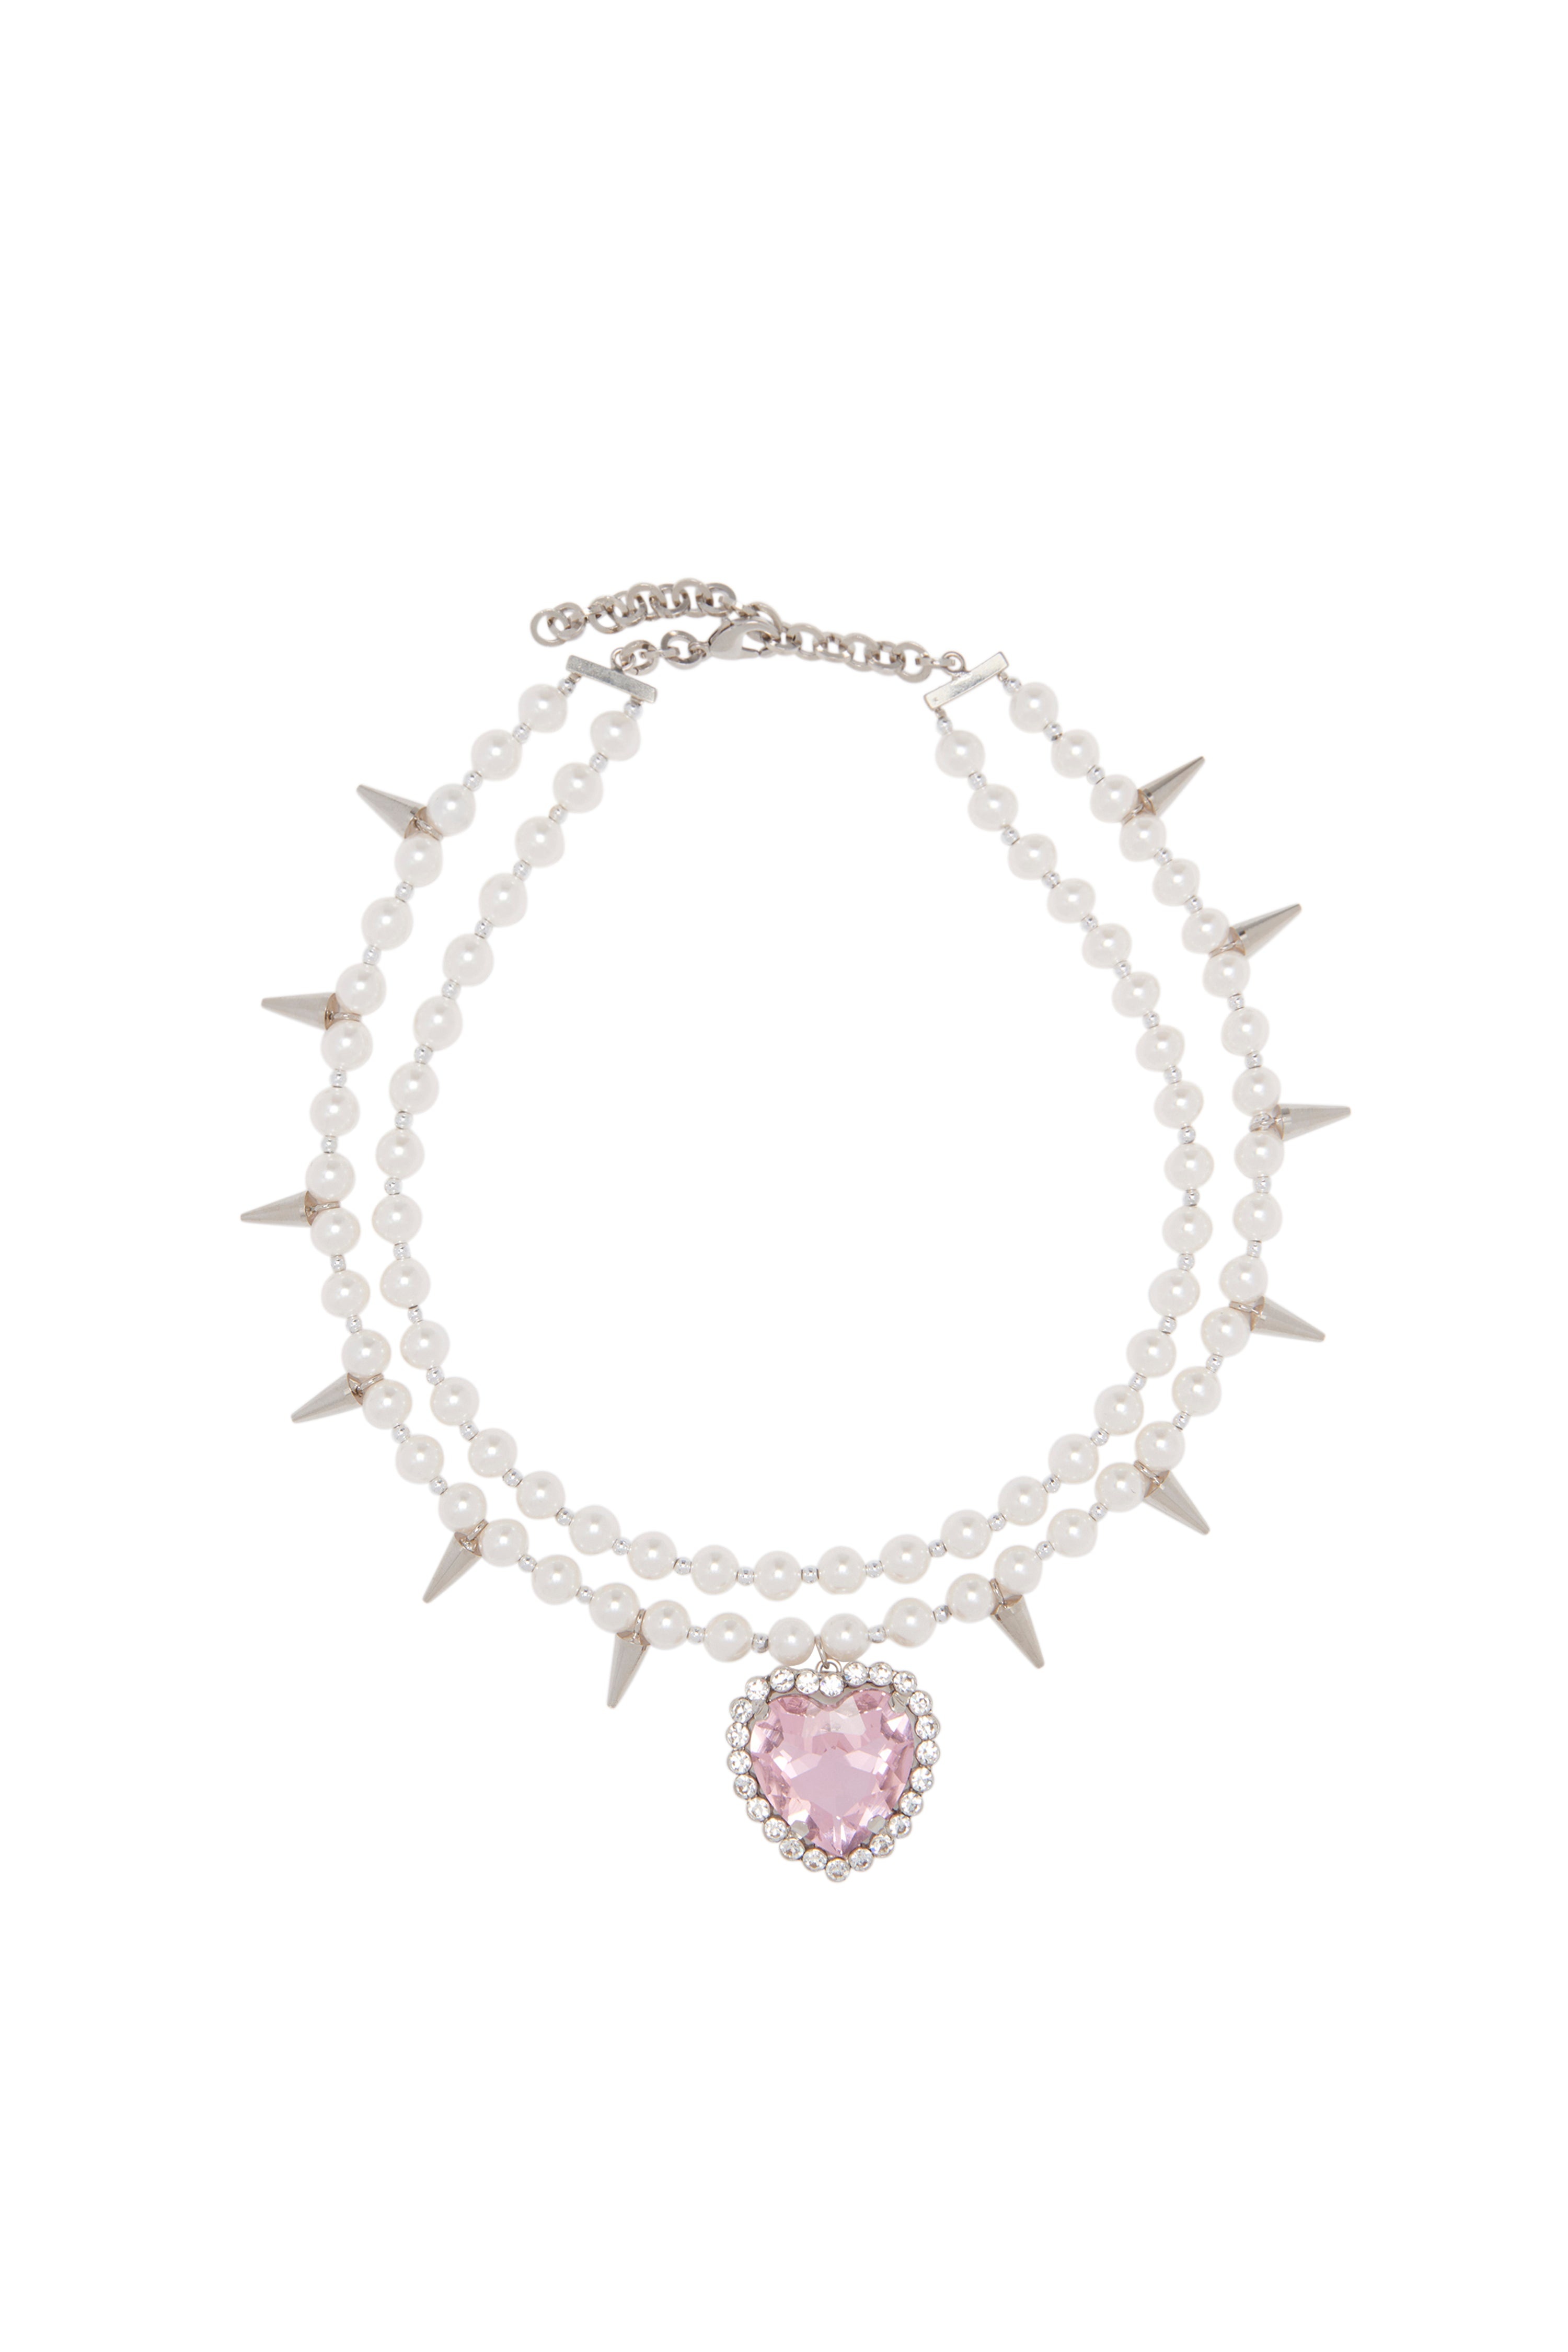 PEARL NECKLACE WITH SPIKES AND CRYSTAL HEART - 1